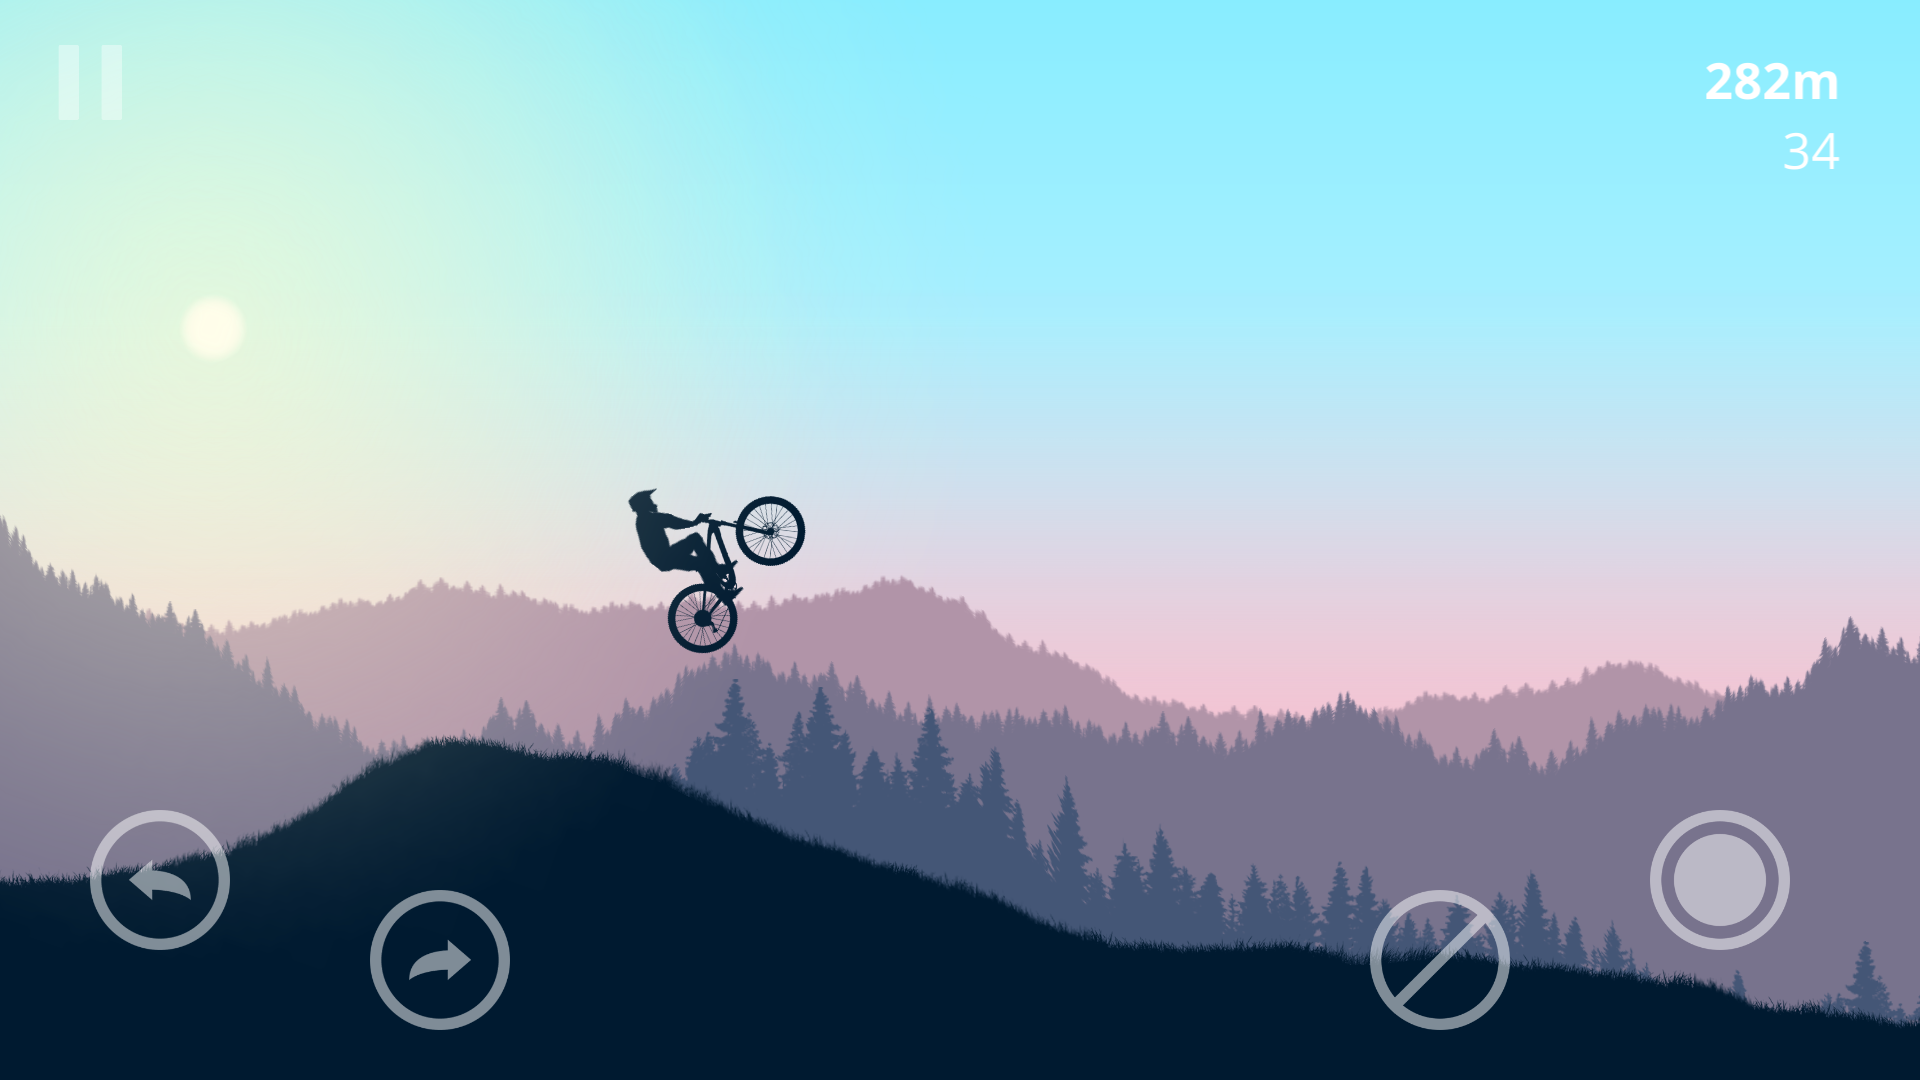 Mountain Bike Xtreme download the new for apple